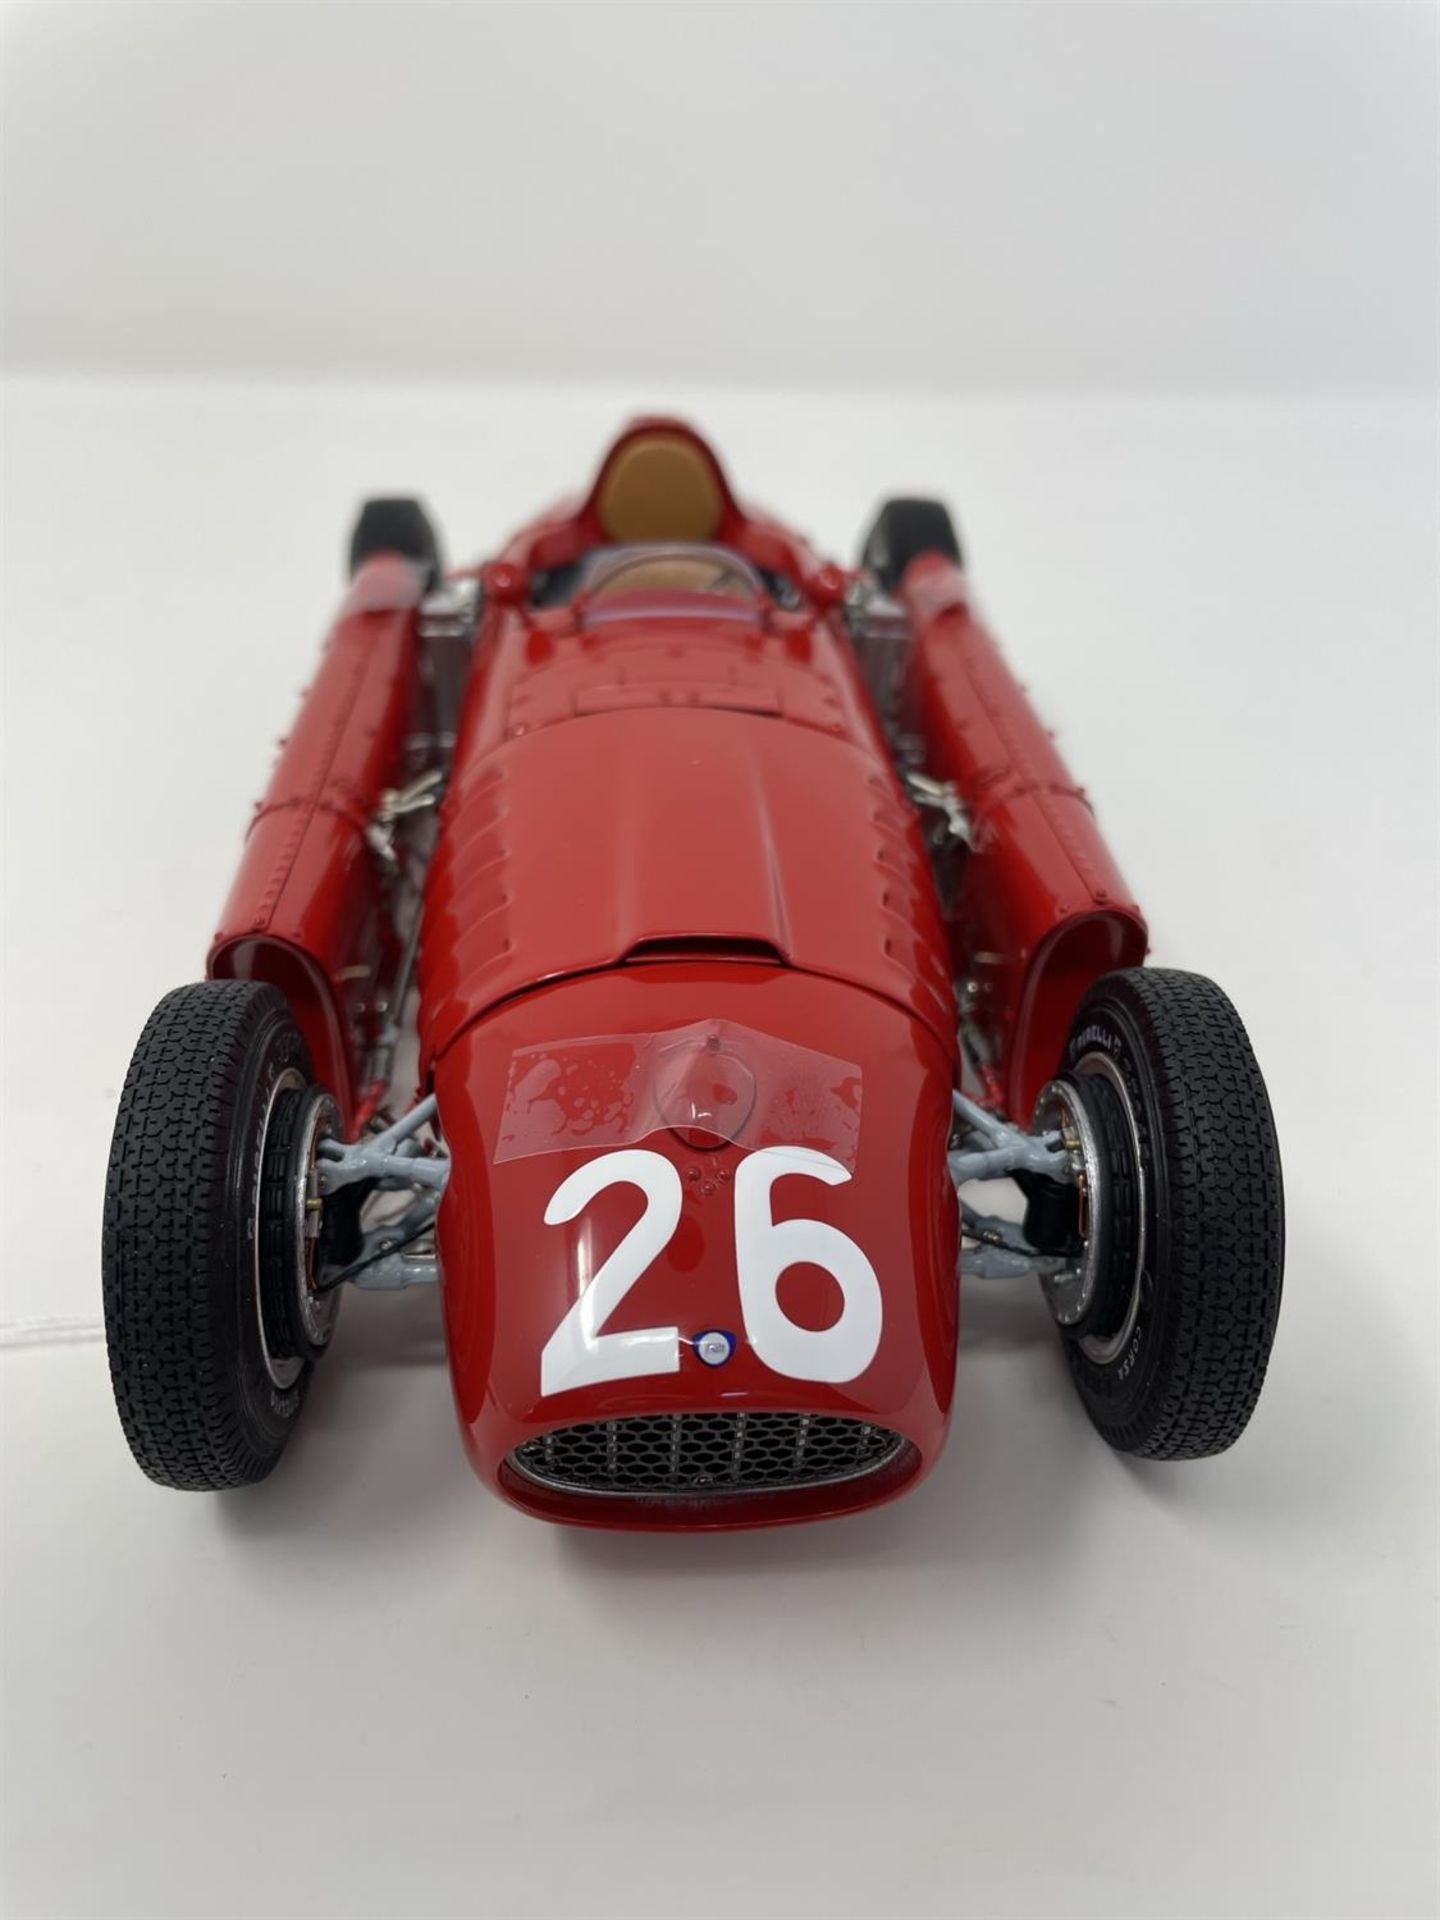 CMC Lancia D50 1:18th Scale Highly Detailed Model - Image 3 of 10